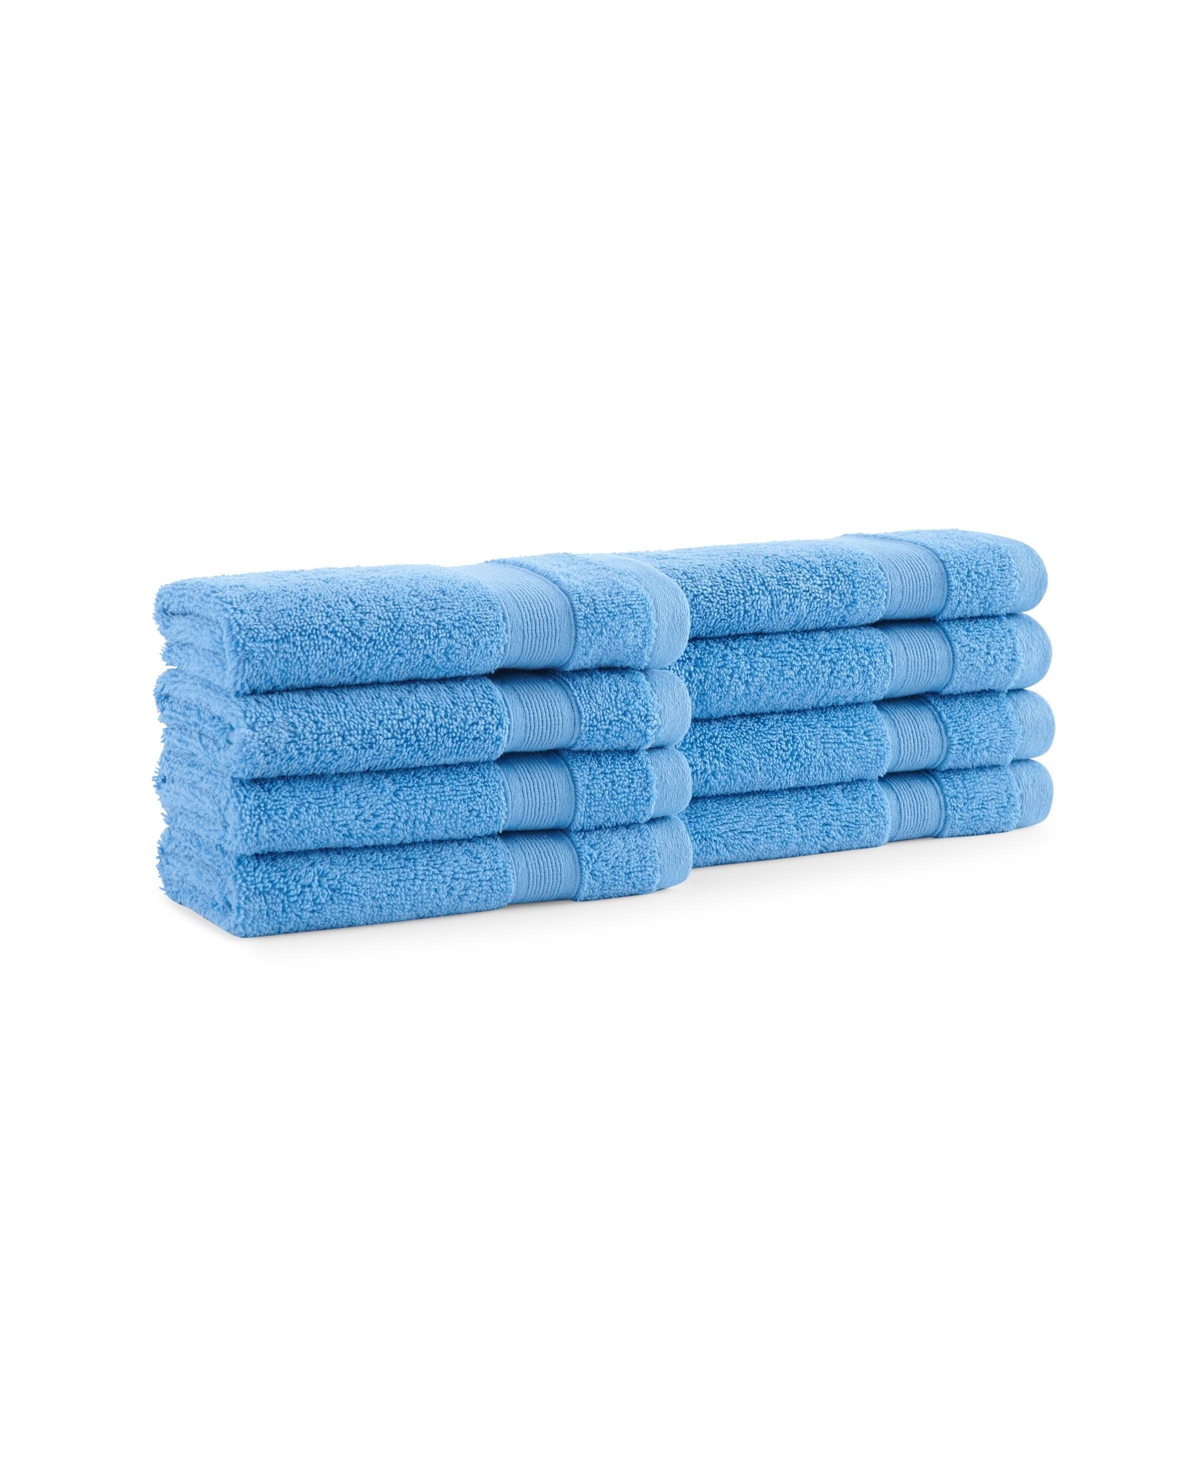 Aston and Arden Luxury Turkish Washcloths, 8-Pack, 600 gsm, Extra Soft and Plush, 13x13, Solid Color options with Dobby, Size: Copen Blue